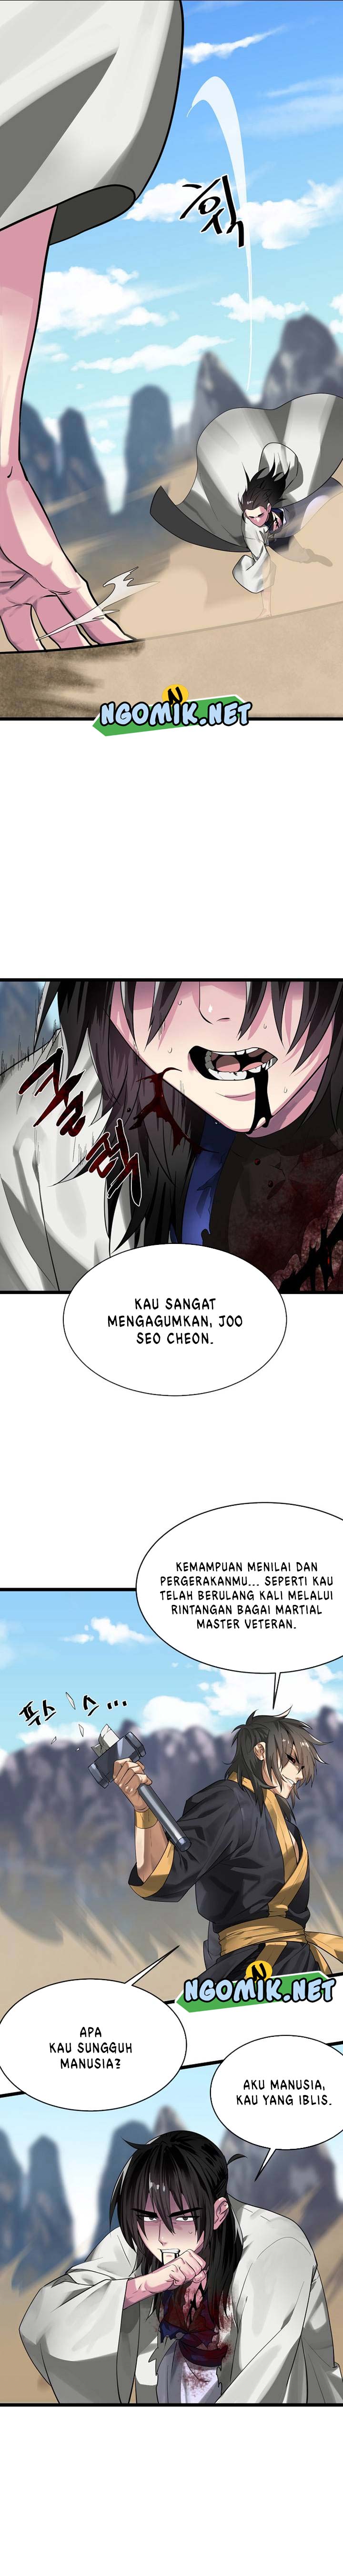 Volcanic Age Chapter 202